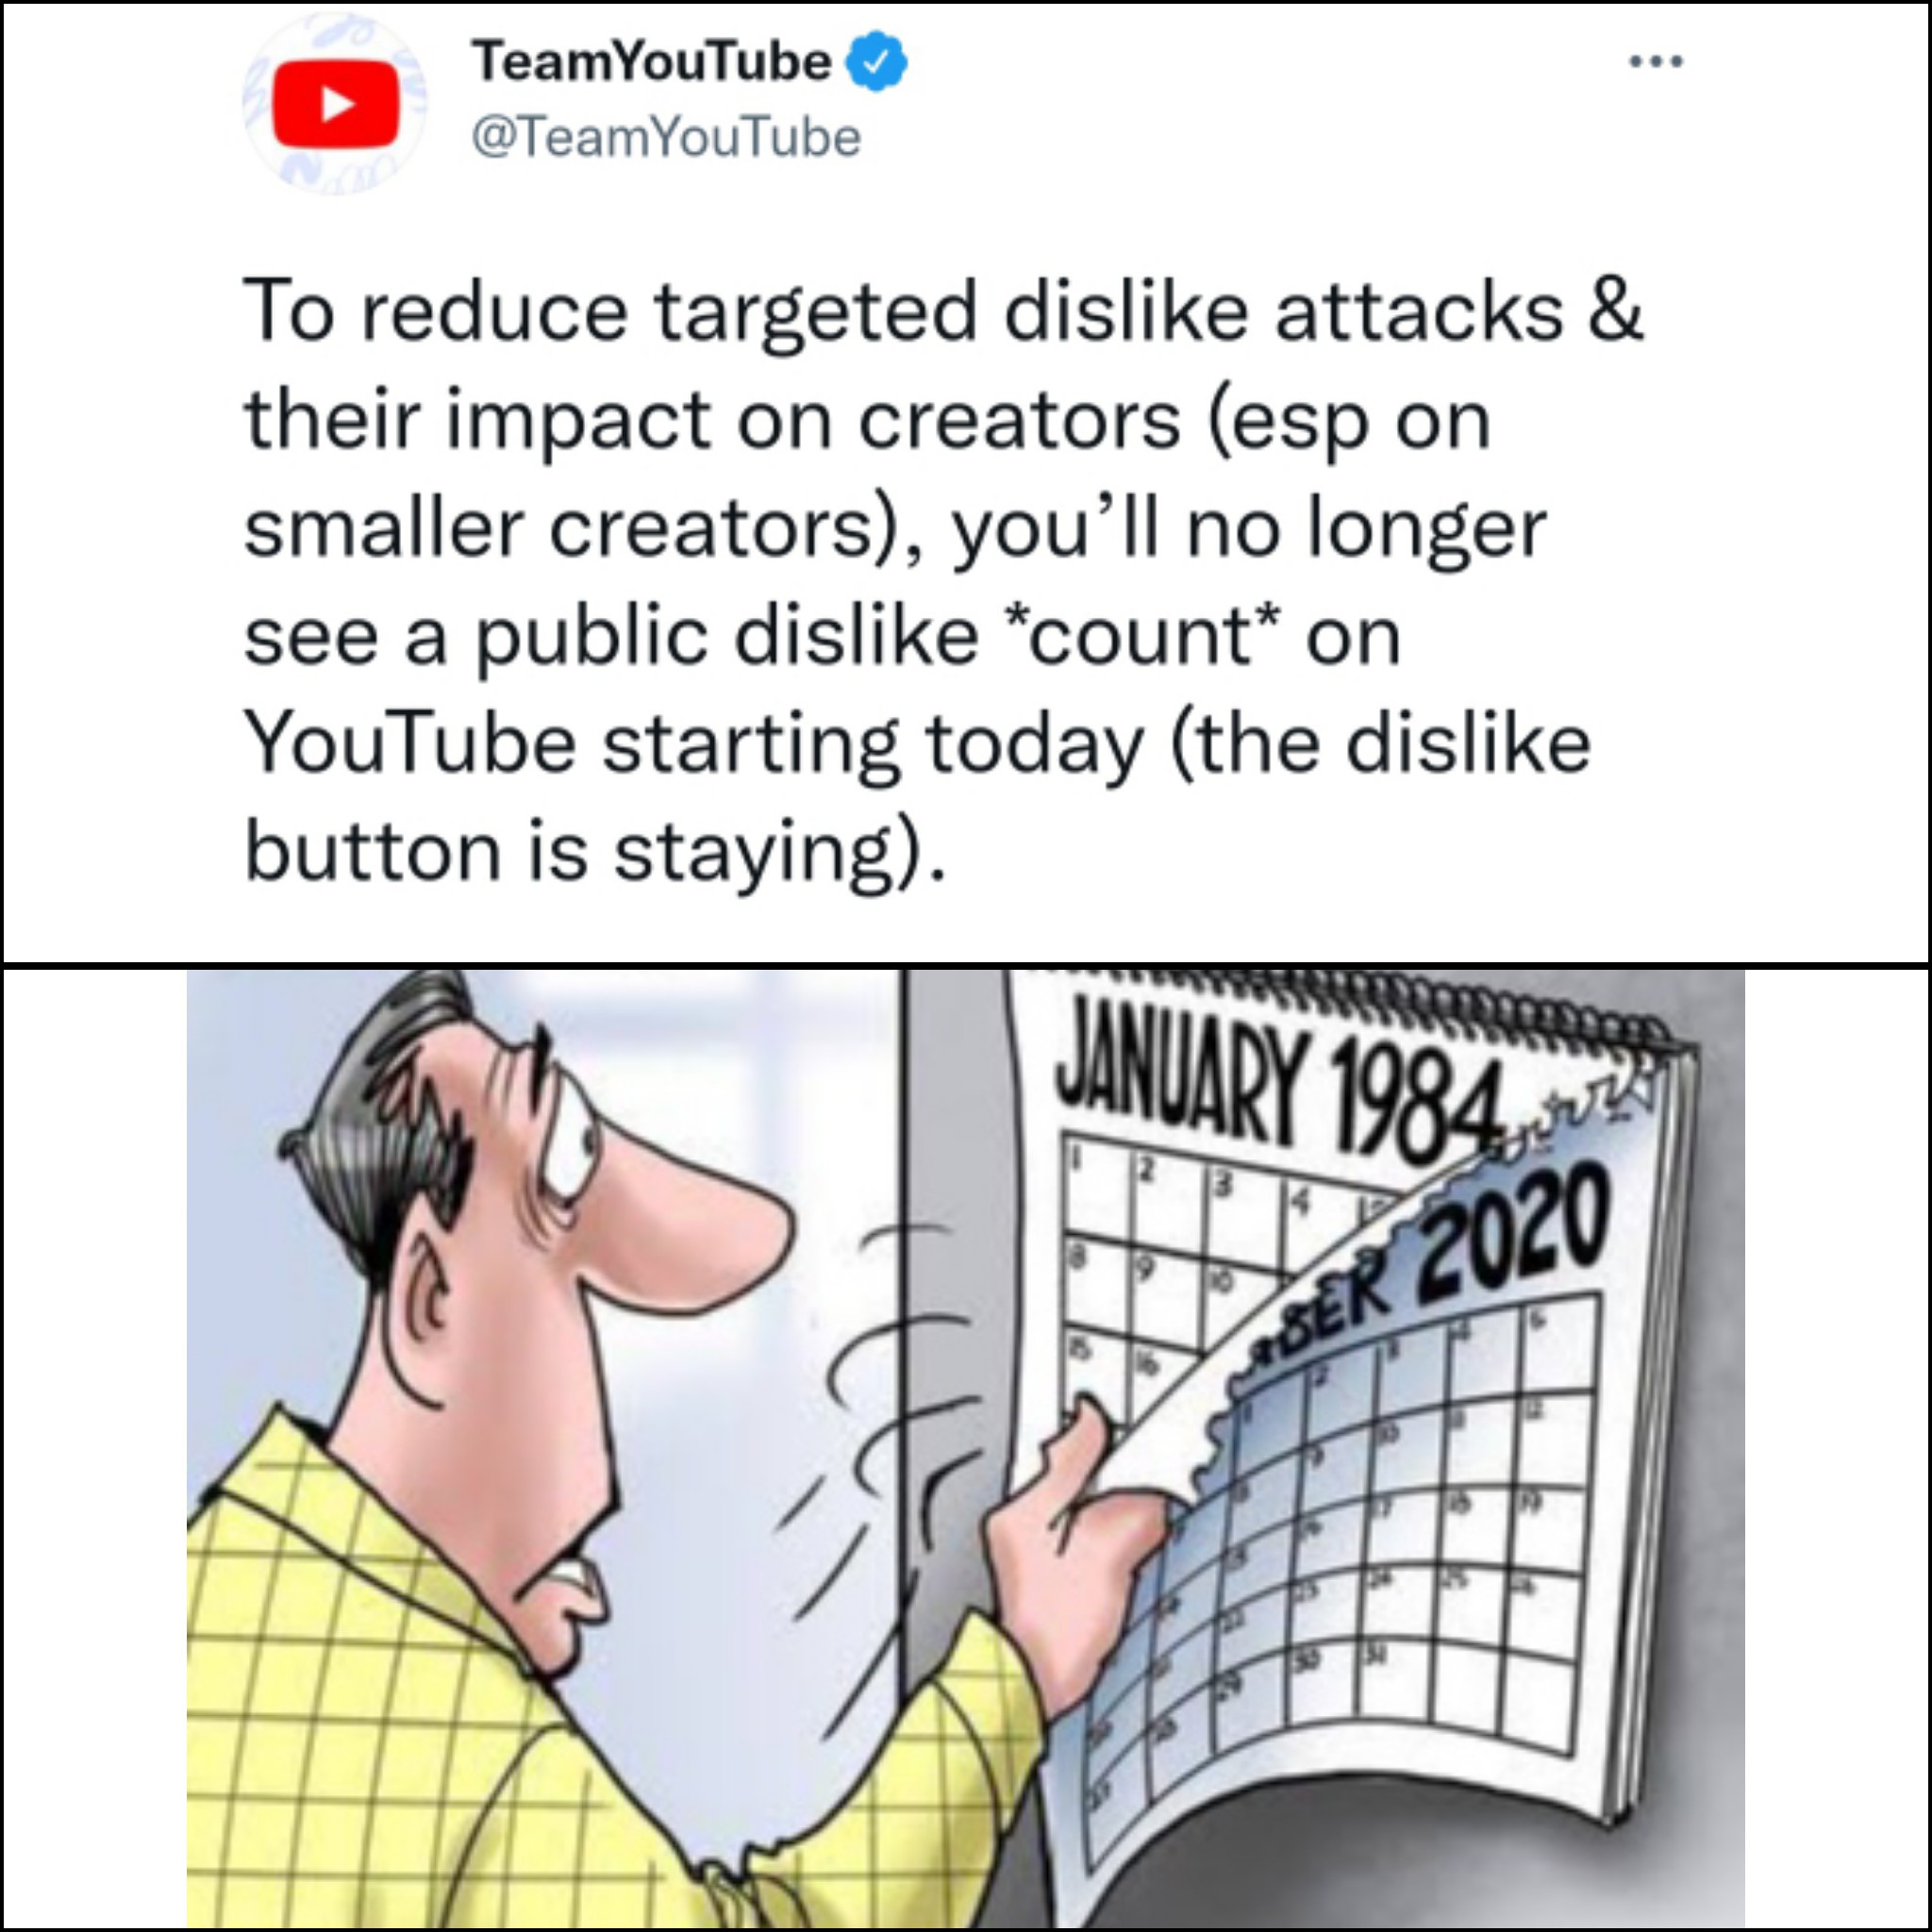 okbuddyretard 1984 - TeamYouTube YouTube To reduce targeted dis attacks & their impact on creators esp on smaller creators, you'll no longer see a public dis count on YouTube starting today the dis button is staying. thx Ser 2020